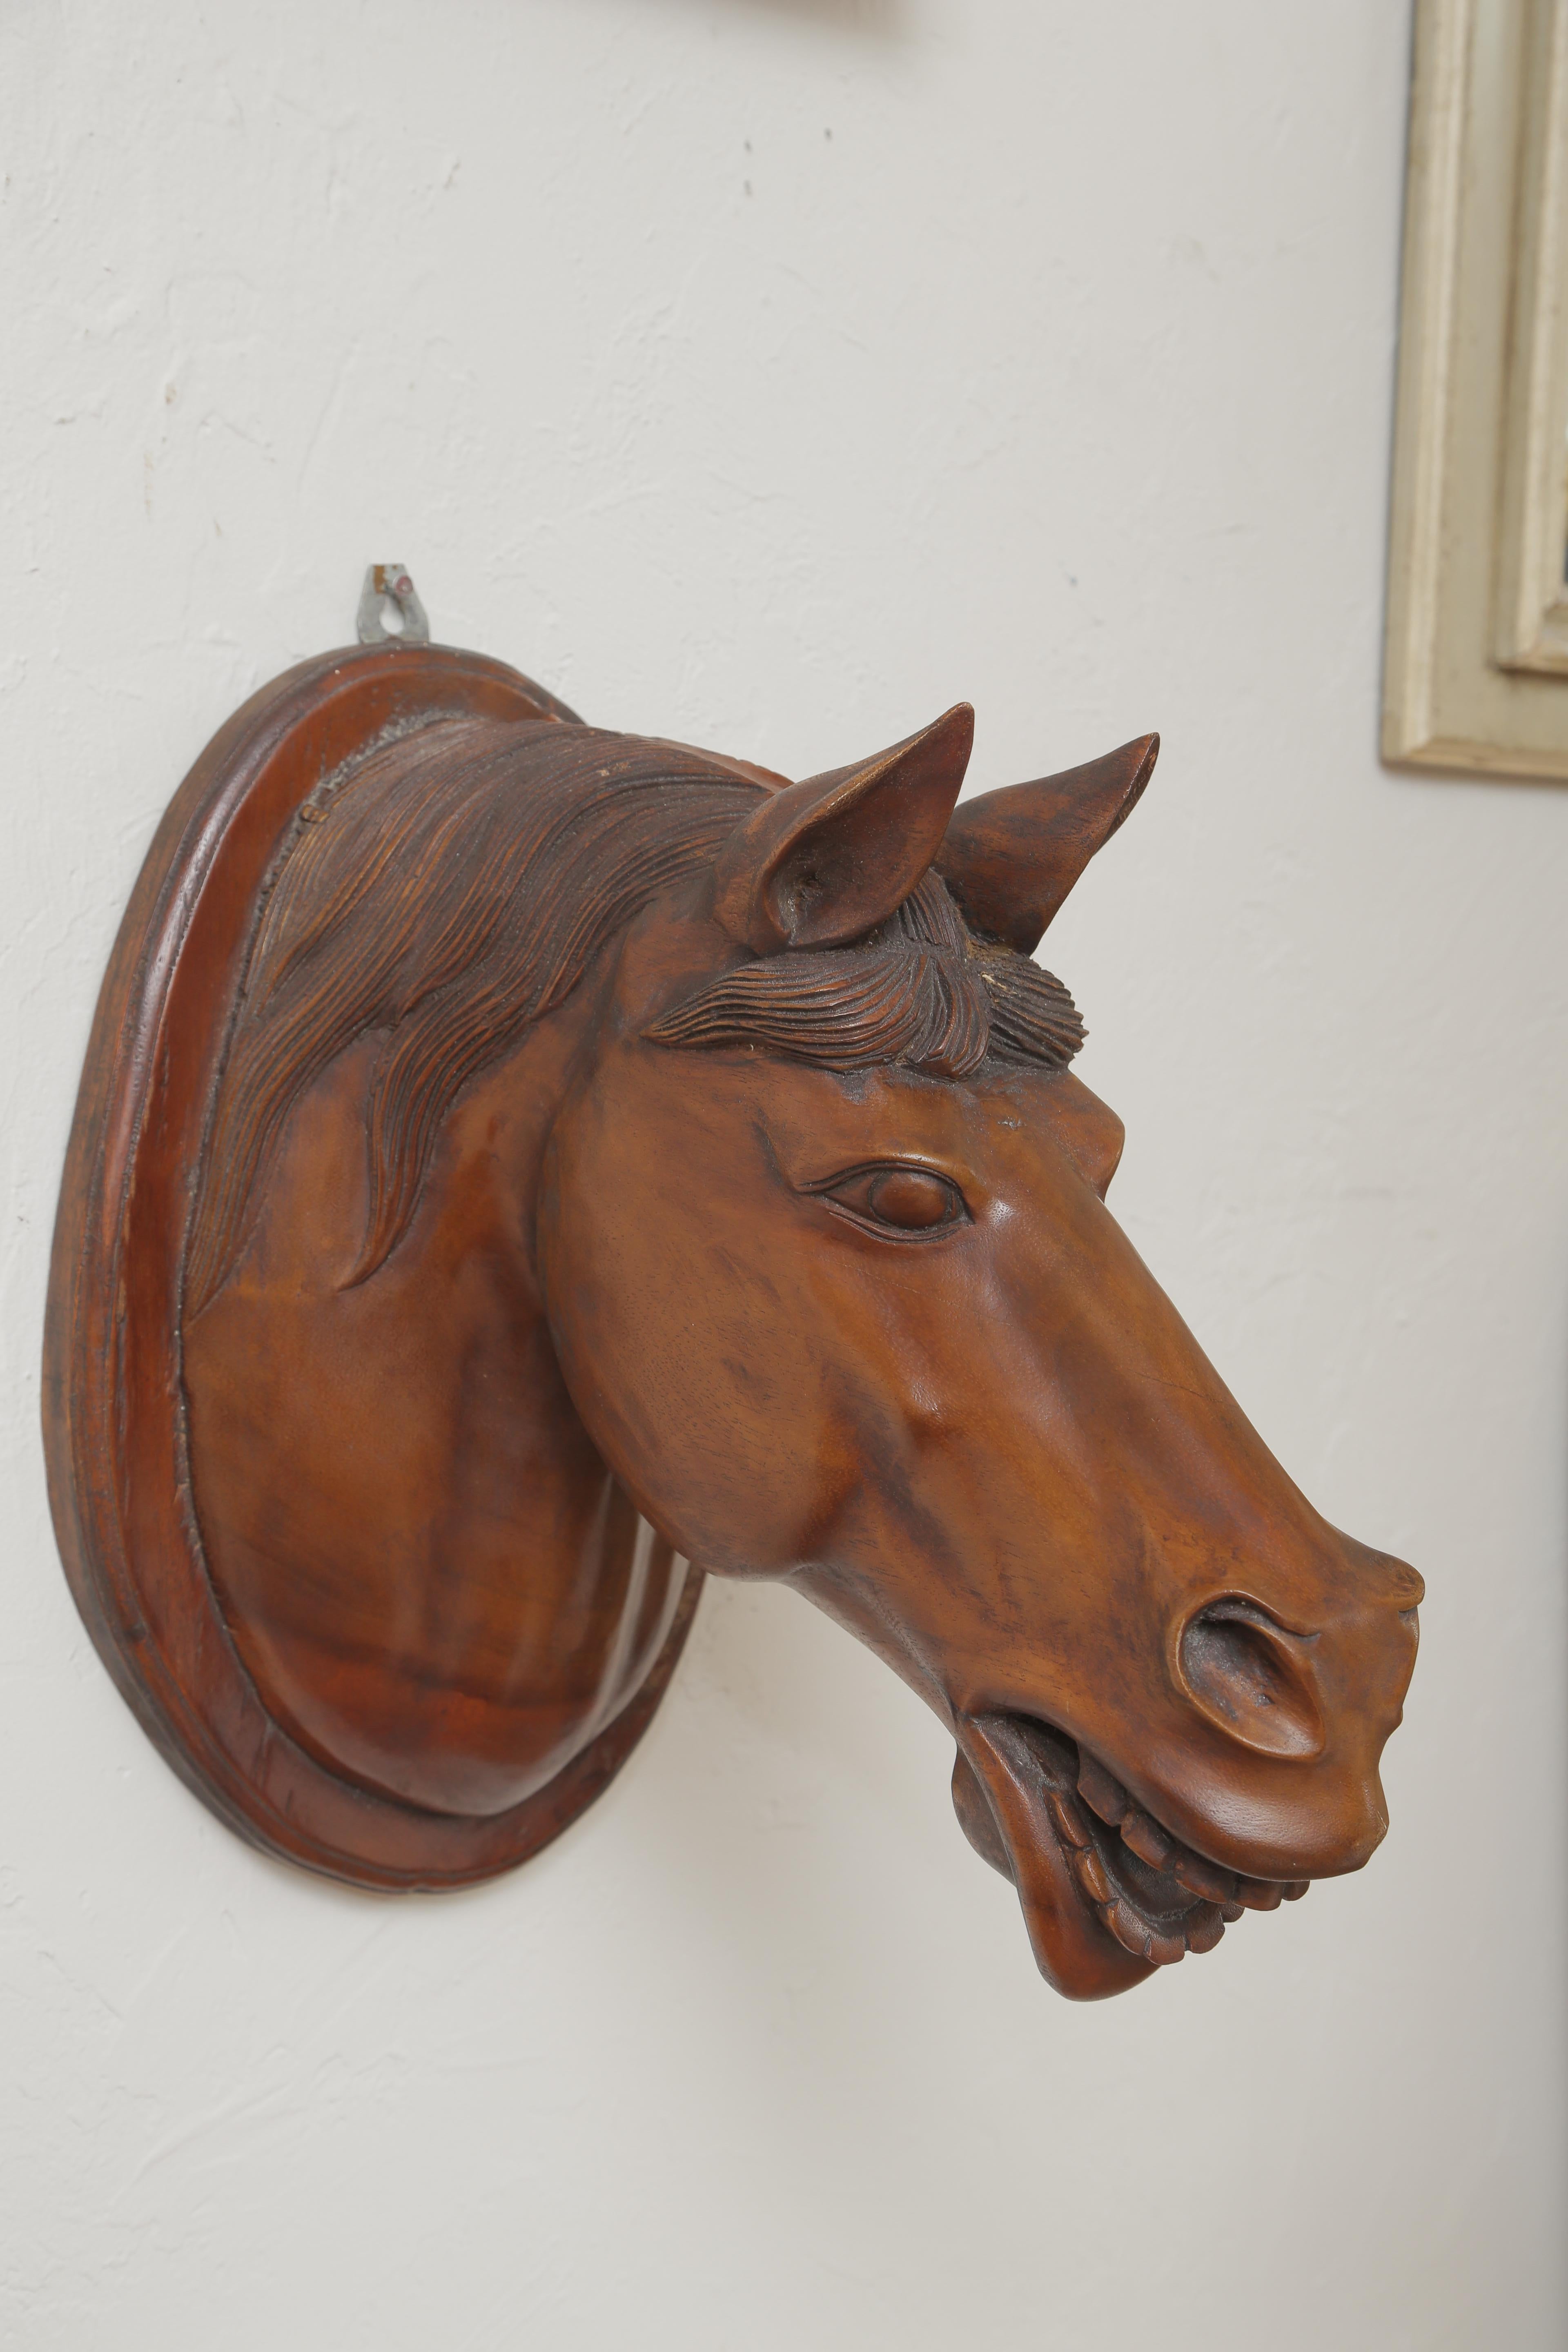 Hand carved sculpture of a horse head.